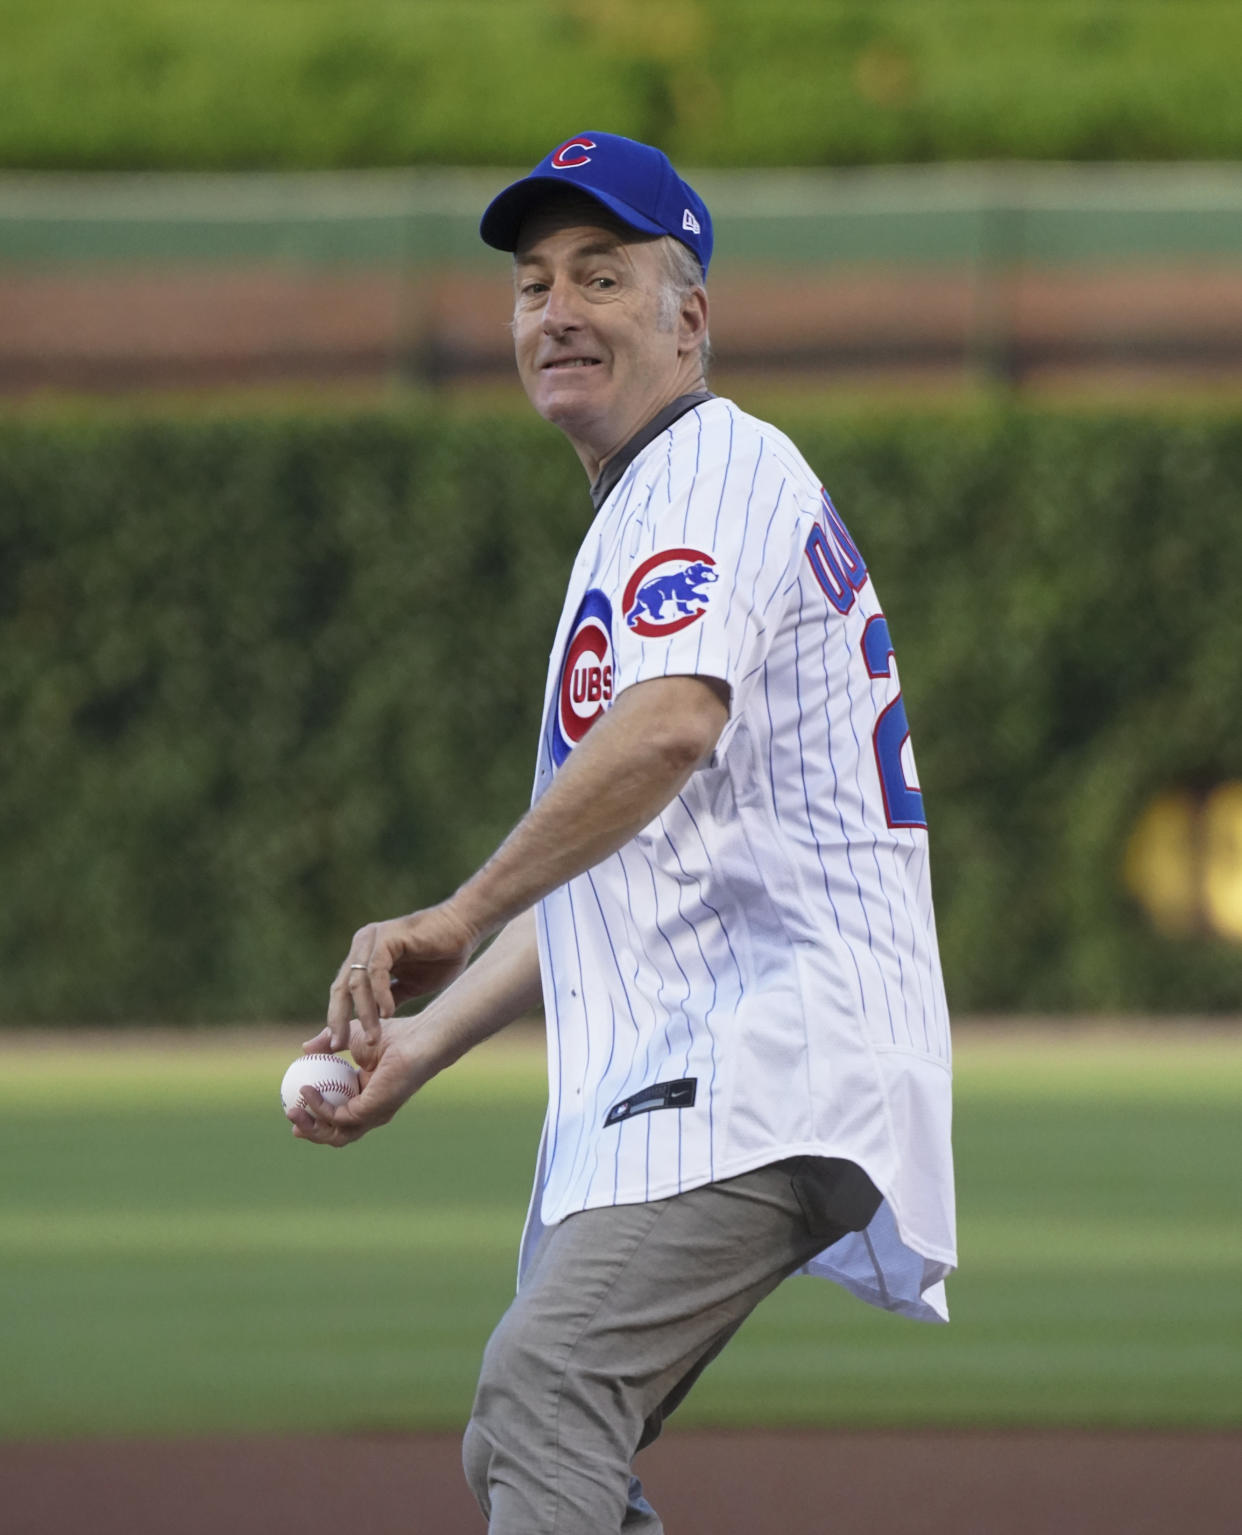 CHICAGO, ILLINOIS - JULY 25: Actor Bob Odenkirk  throws the ceremonial first pitch of the game between the Chicago Cubs and the Pittsburgh Pirates at Wrigley Field on July 25, 2022 in Chicago, Illinois. (Photo by Nuccio DiNuzzo/Getty Images)